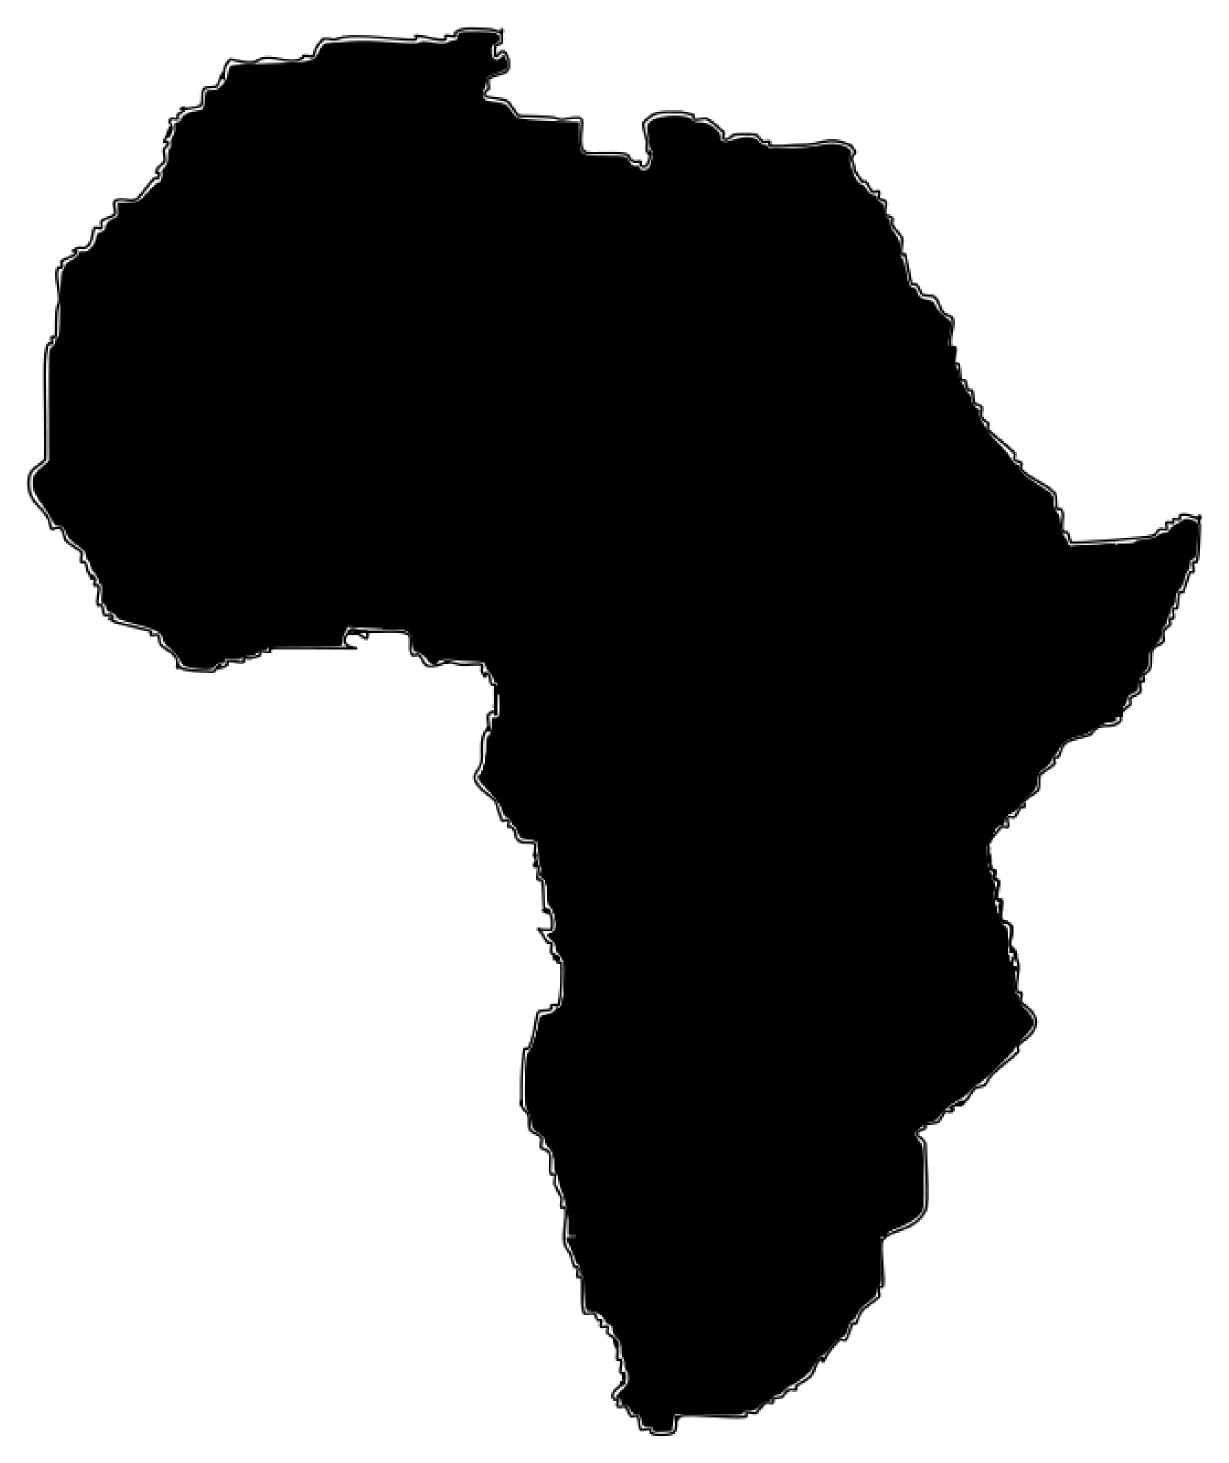 clipart map of africa - photo #24